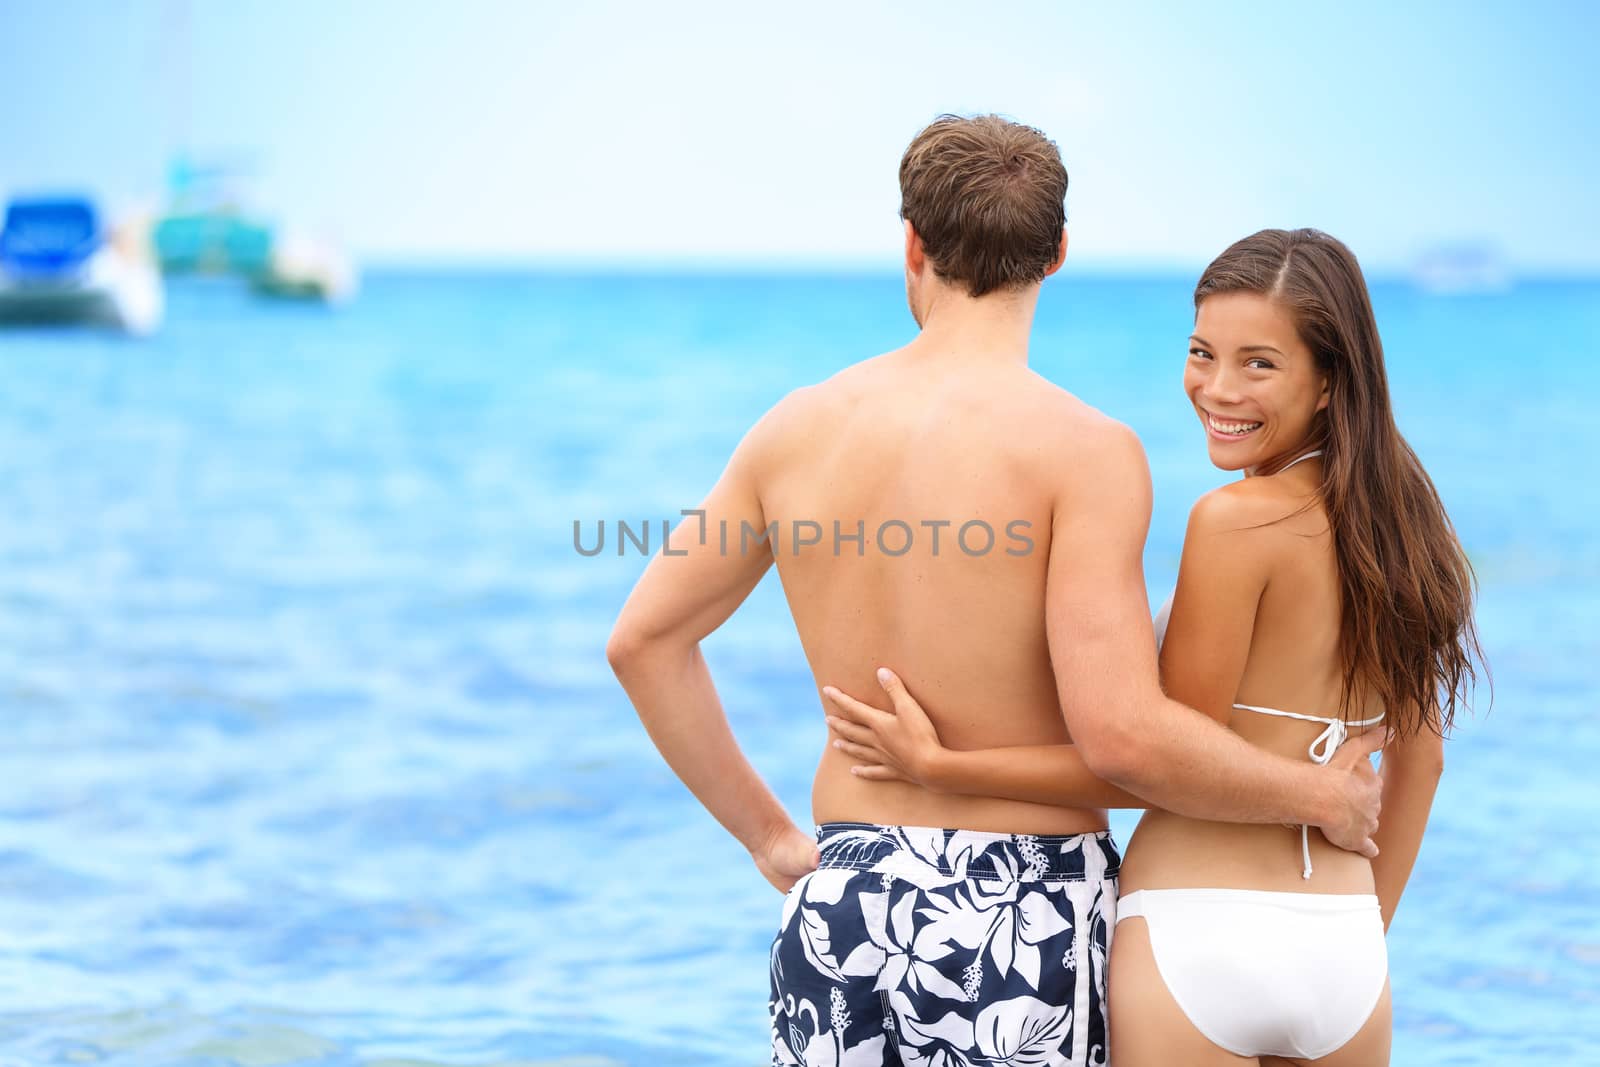 Couple beach portrait happy woman in relationship. Young Asian woman looking back at camera confident of her lover or having a secret to share, on tropical vacation.